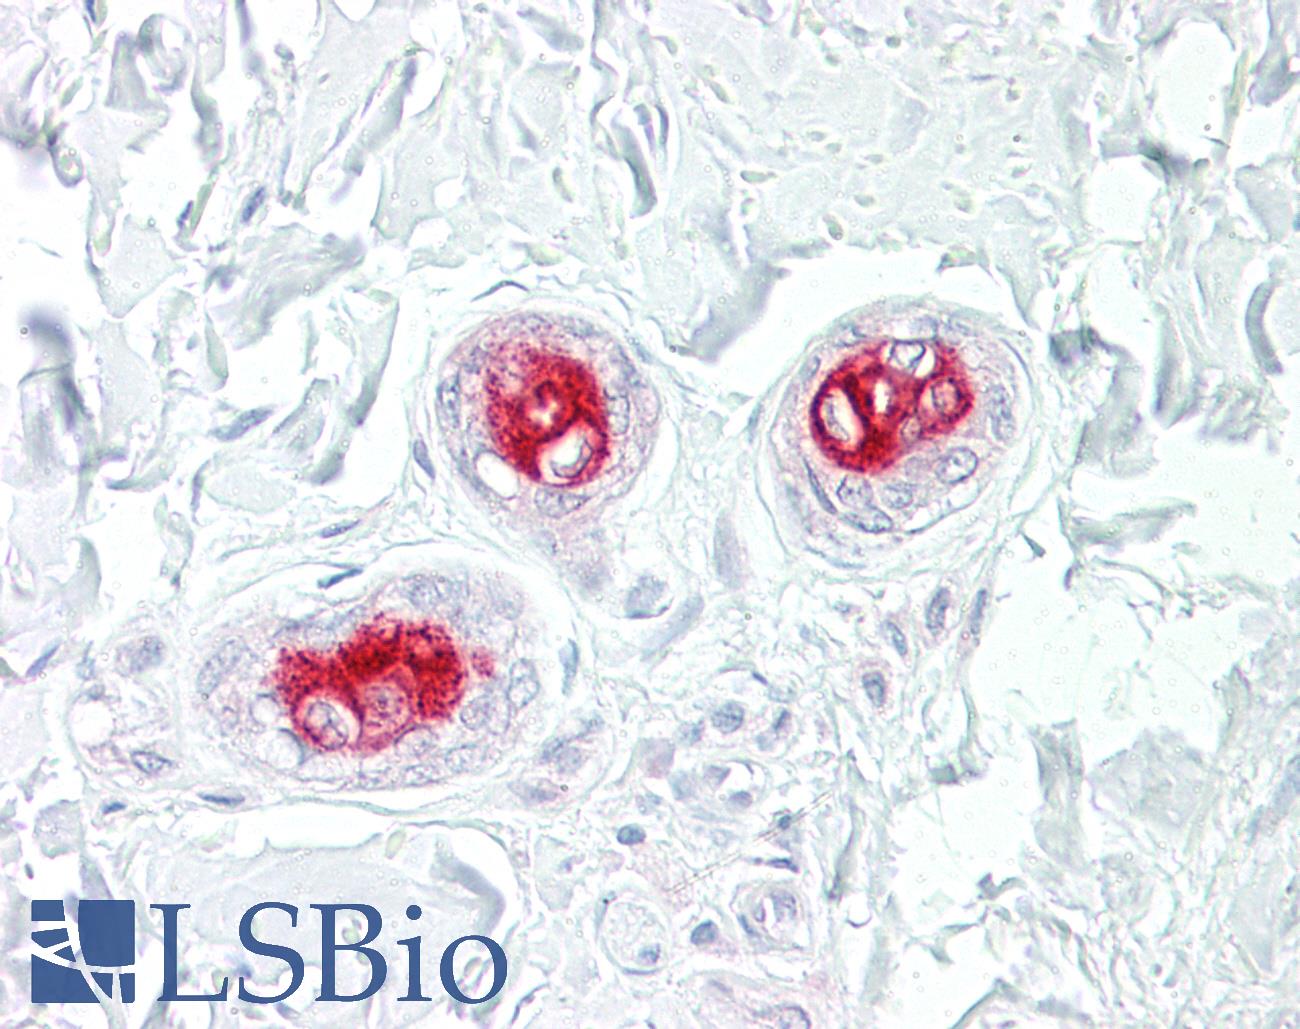 MAP3K5 / ASK1 Antibody - Anti-MAP3K5 / ASK1 antibody IHC of human skin, sweat ducts. Immunohistochemistry of formalin-fixed, paraffin-embedded tissue after heat-induced antigen retrieval. Antibody dilution 1:100.